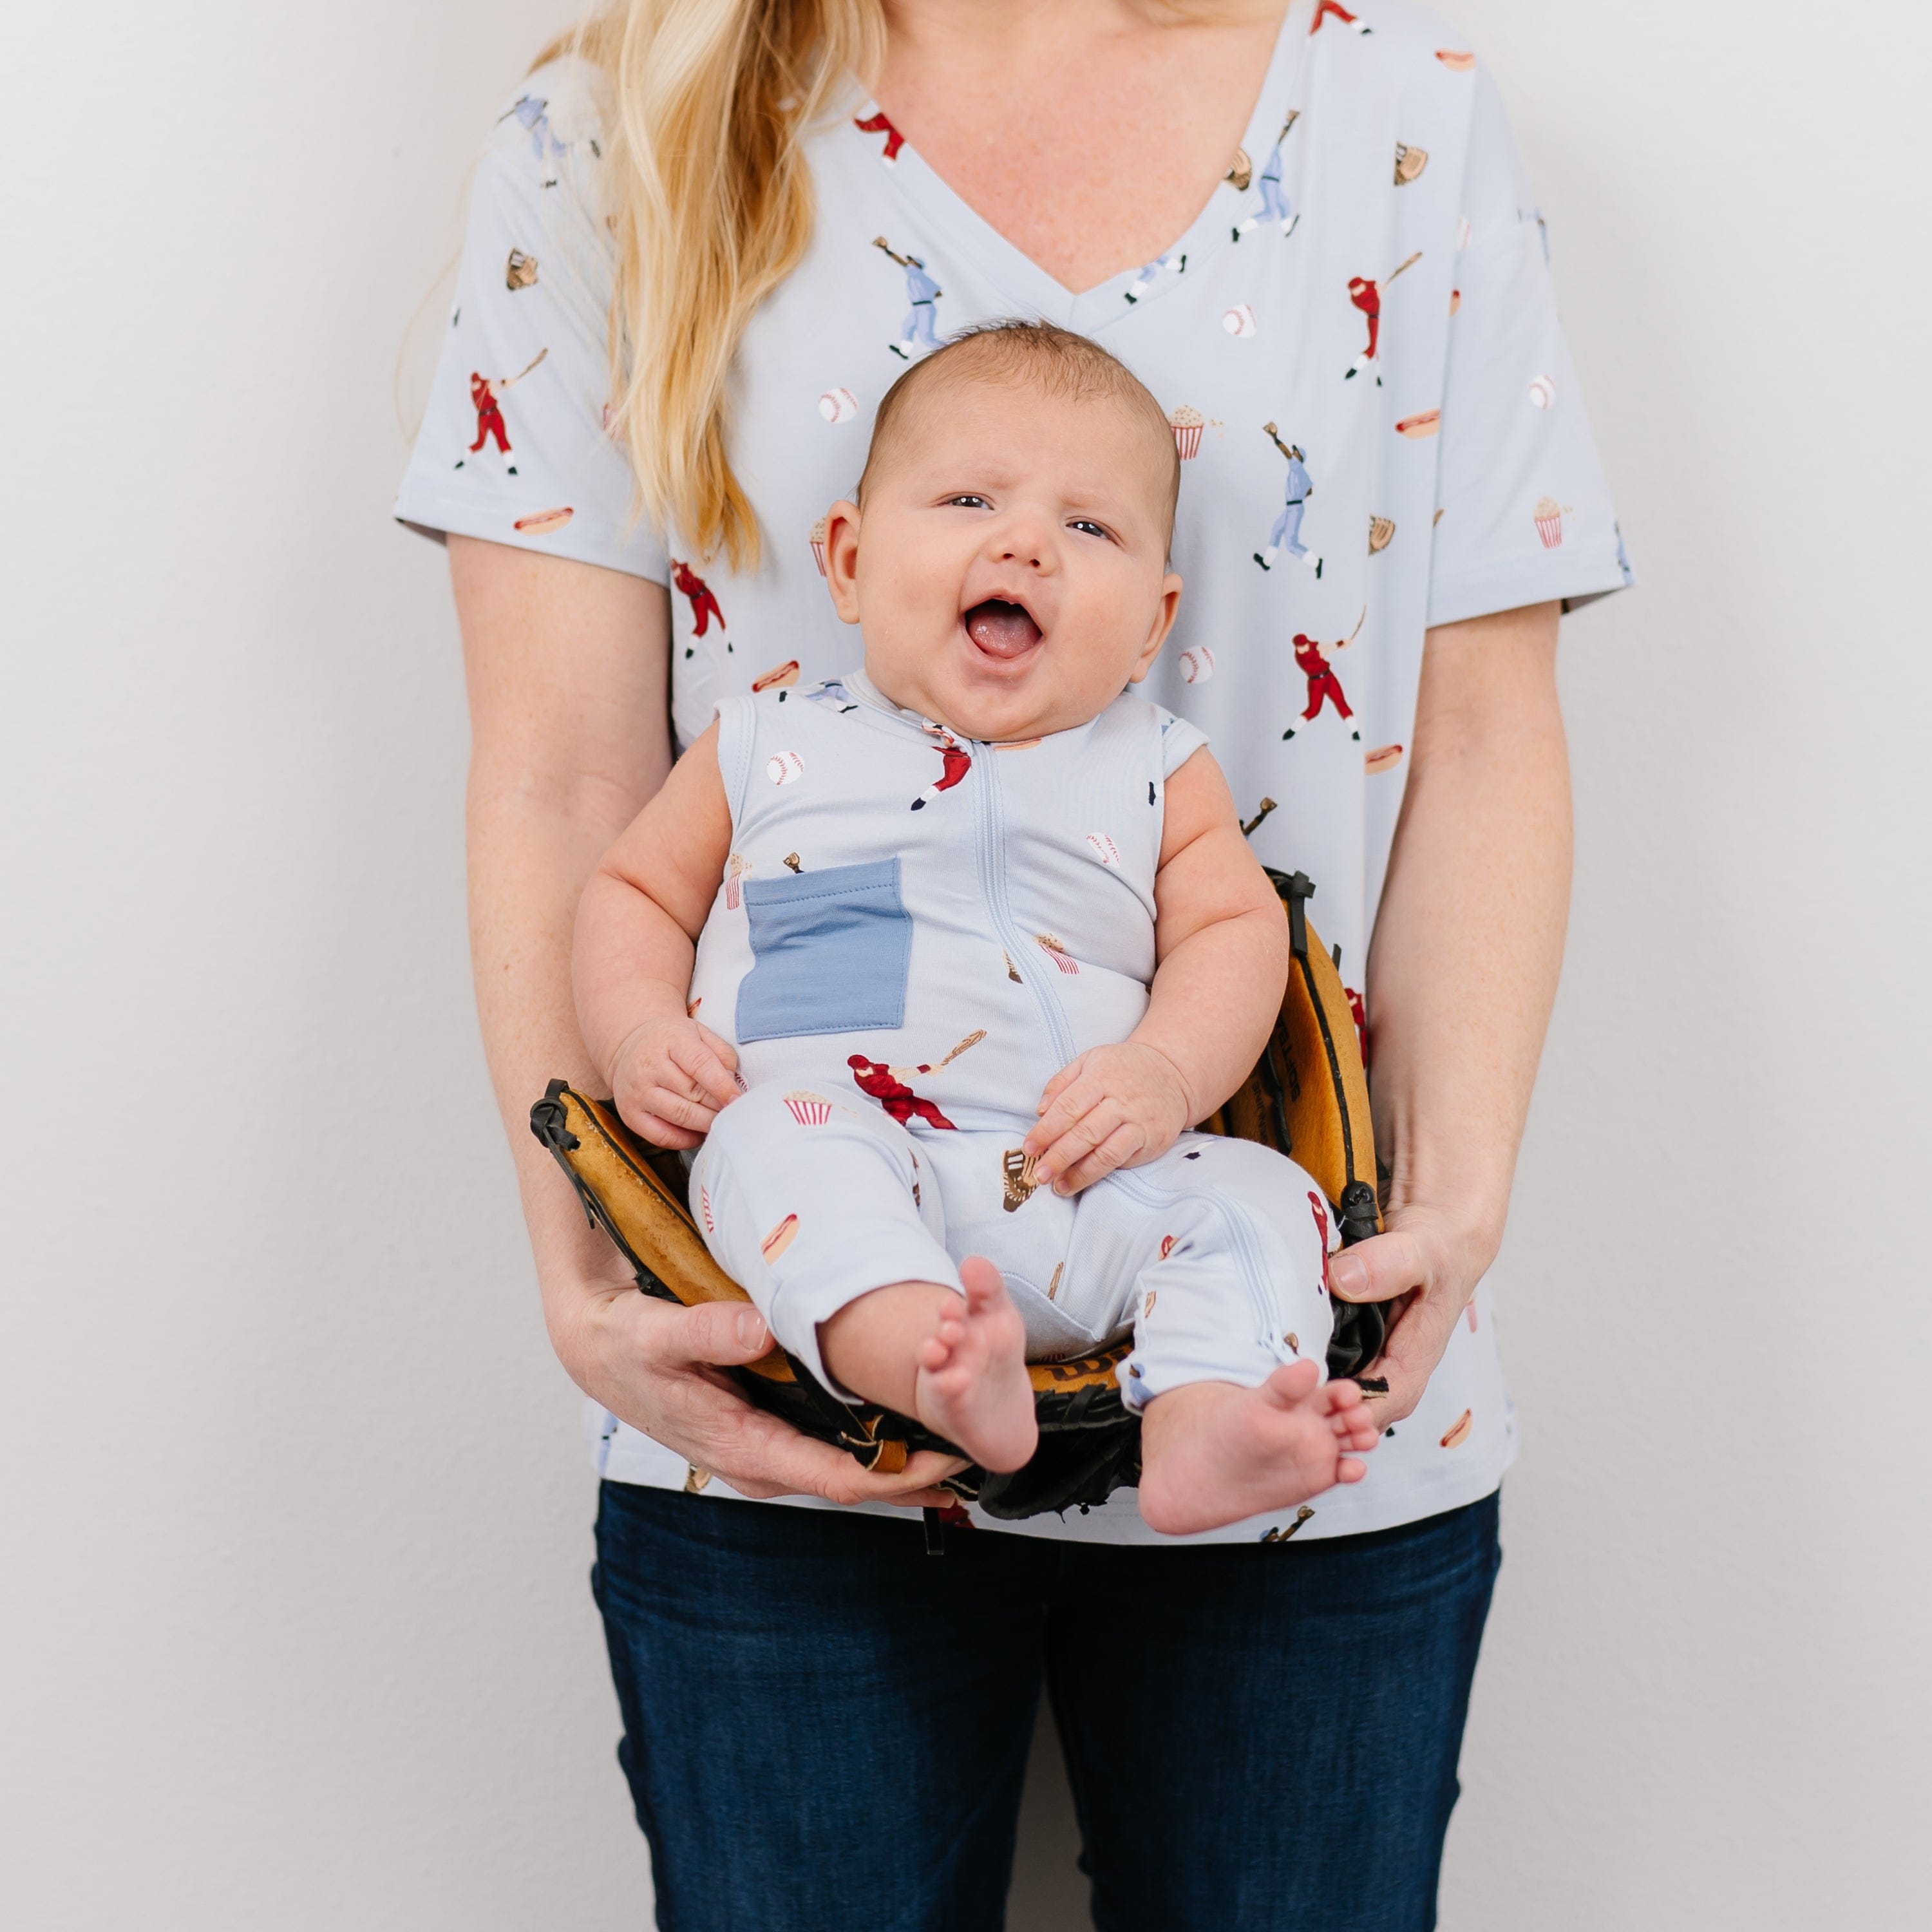 Mom and baby in coordinating Kyte Baby outfits in Vintage Baseball pattern